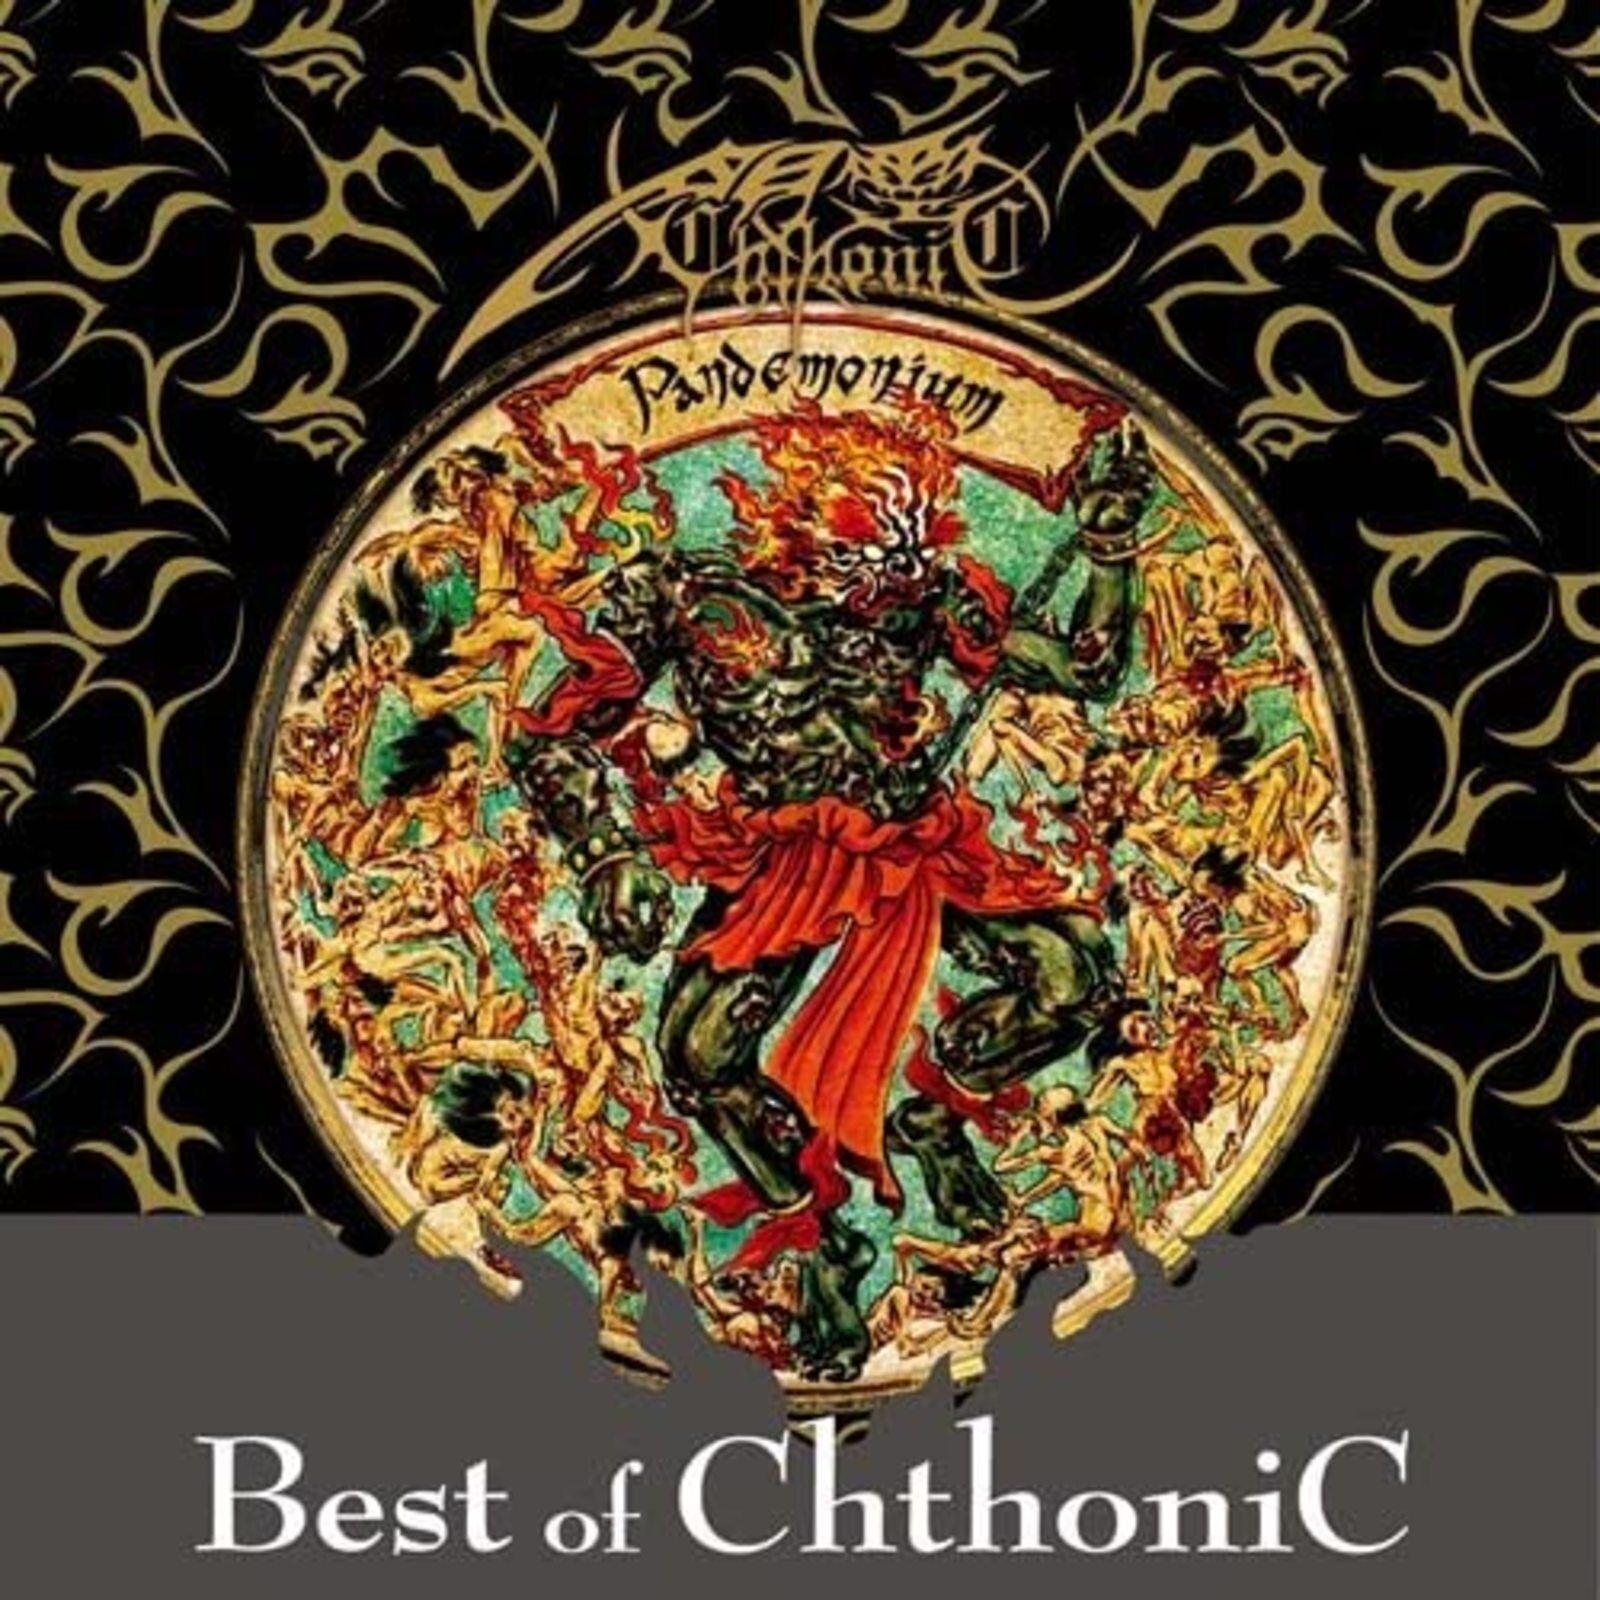 CHTHONIC Pandemonium - Best Of CD Free Shipping with Tracking# New from Japan